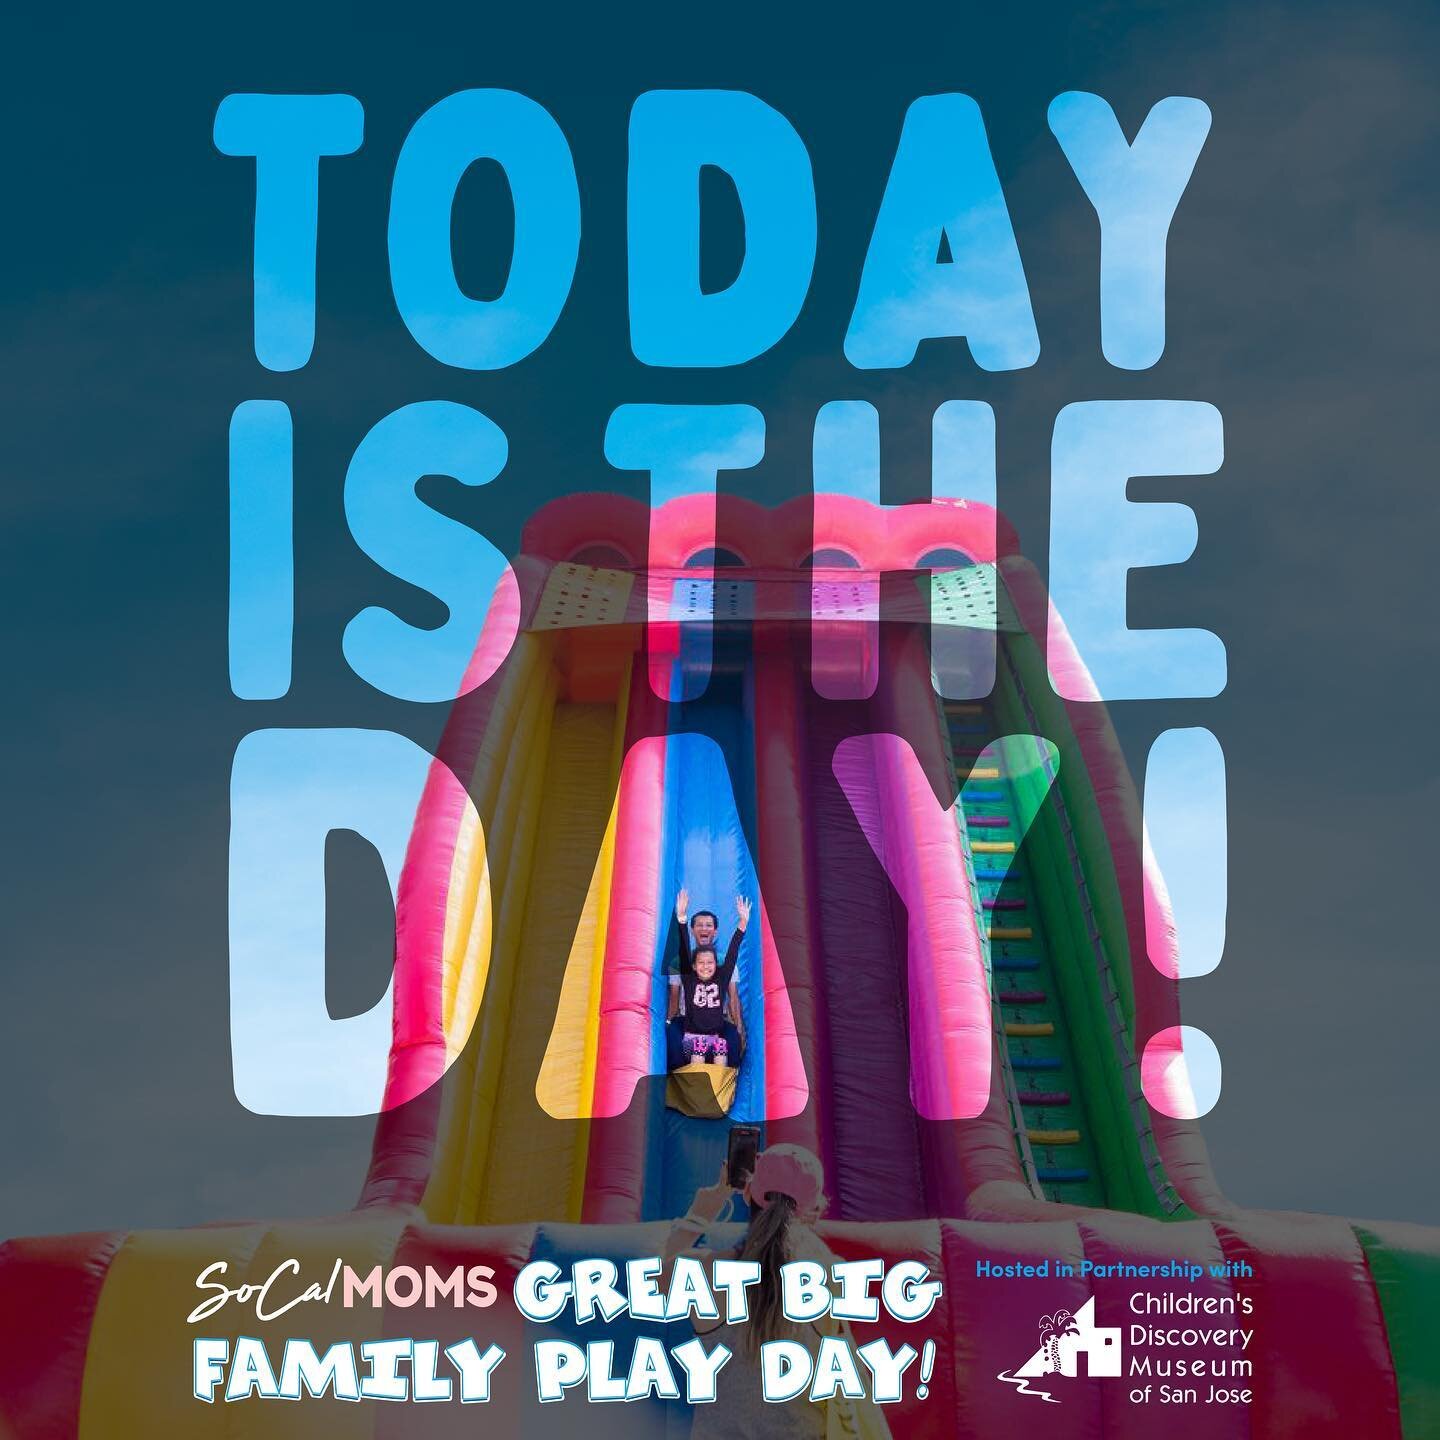 General admission tickets are available on site today for $15. General admission hours are 1130am-4pm! #greatbigfamilyplayday #familyfestival #familyfun